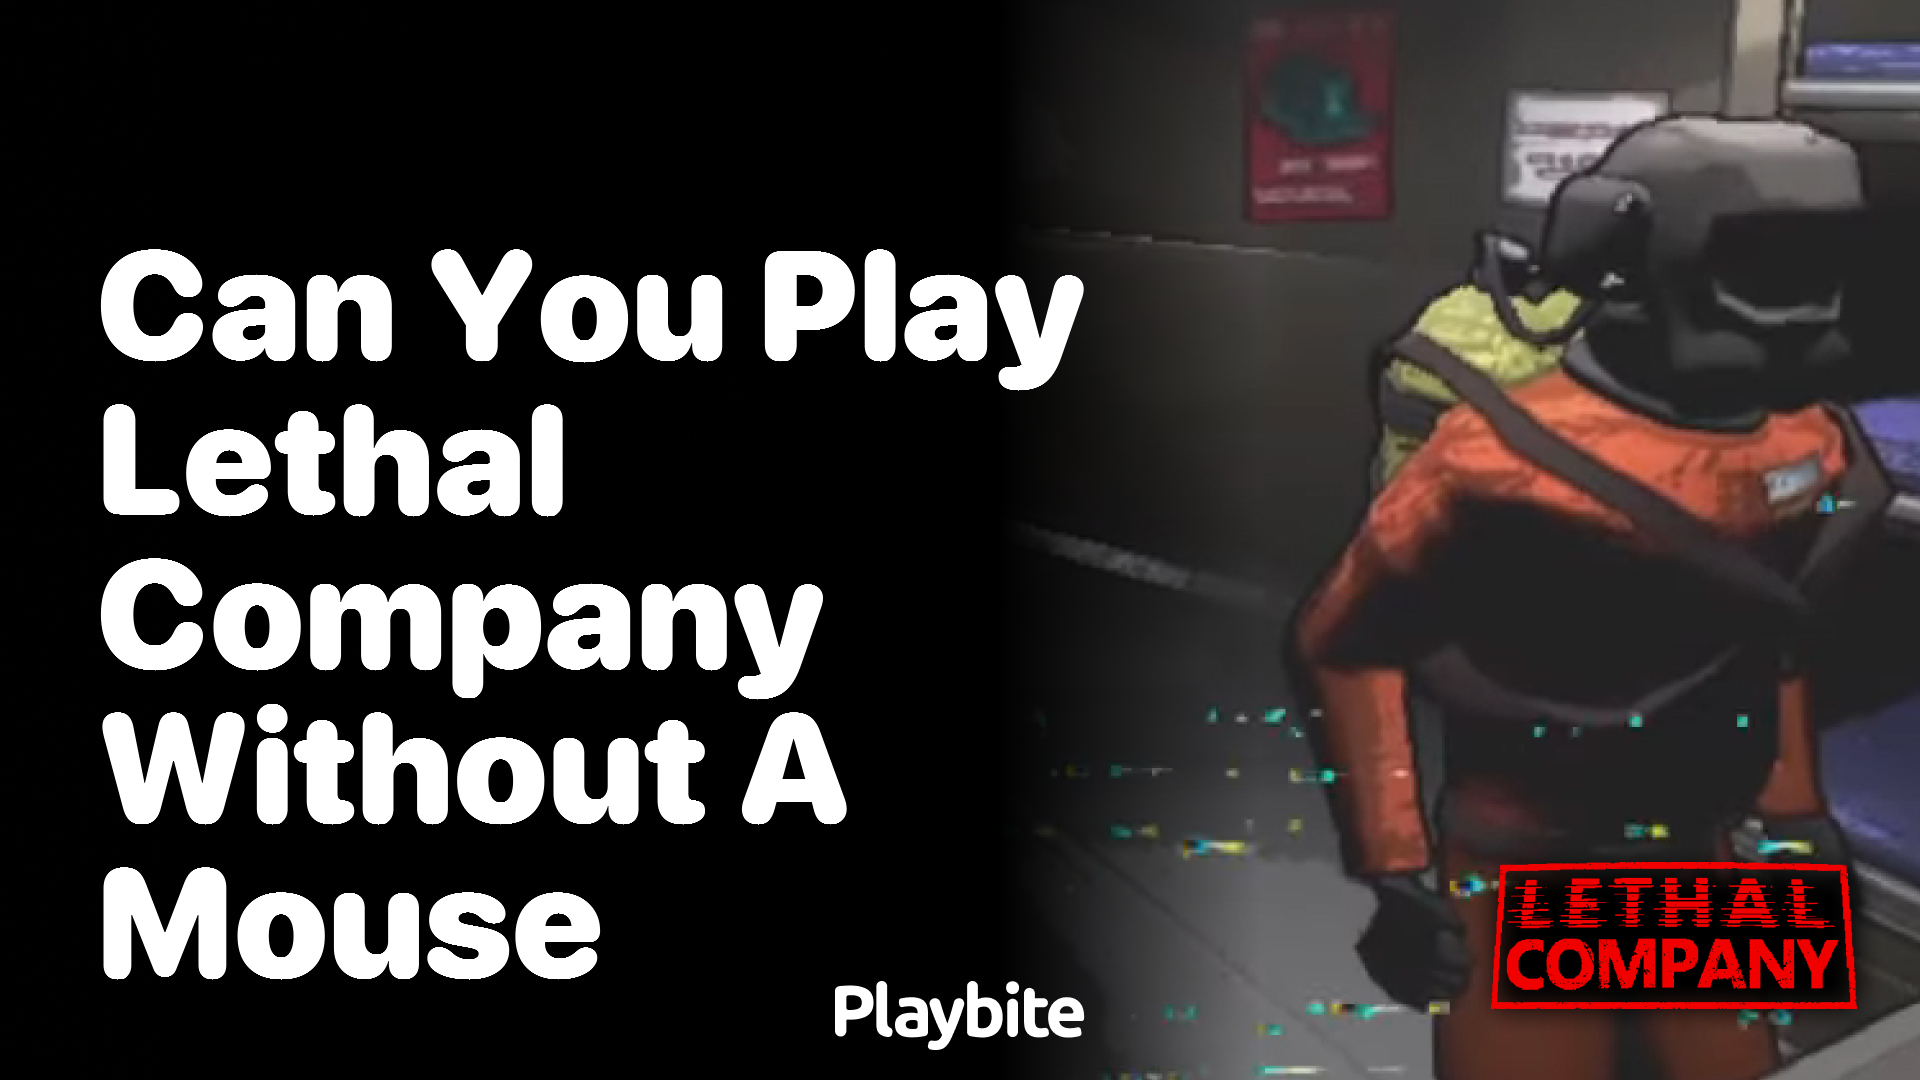 Can you play Lethal Company without a mouse?